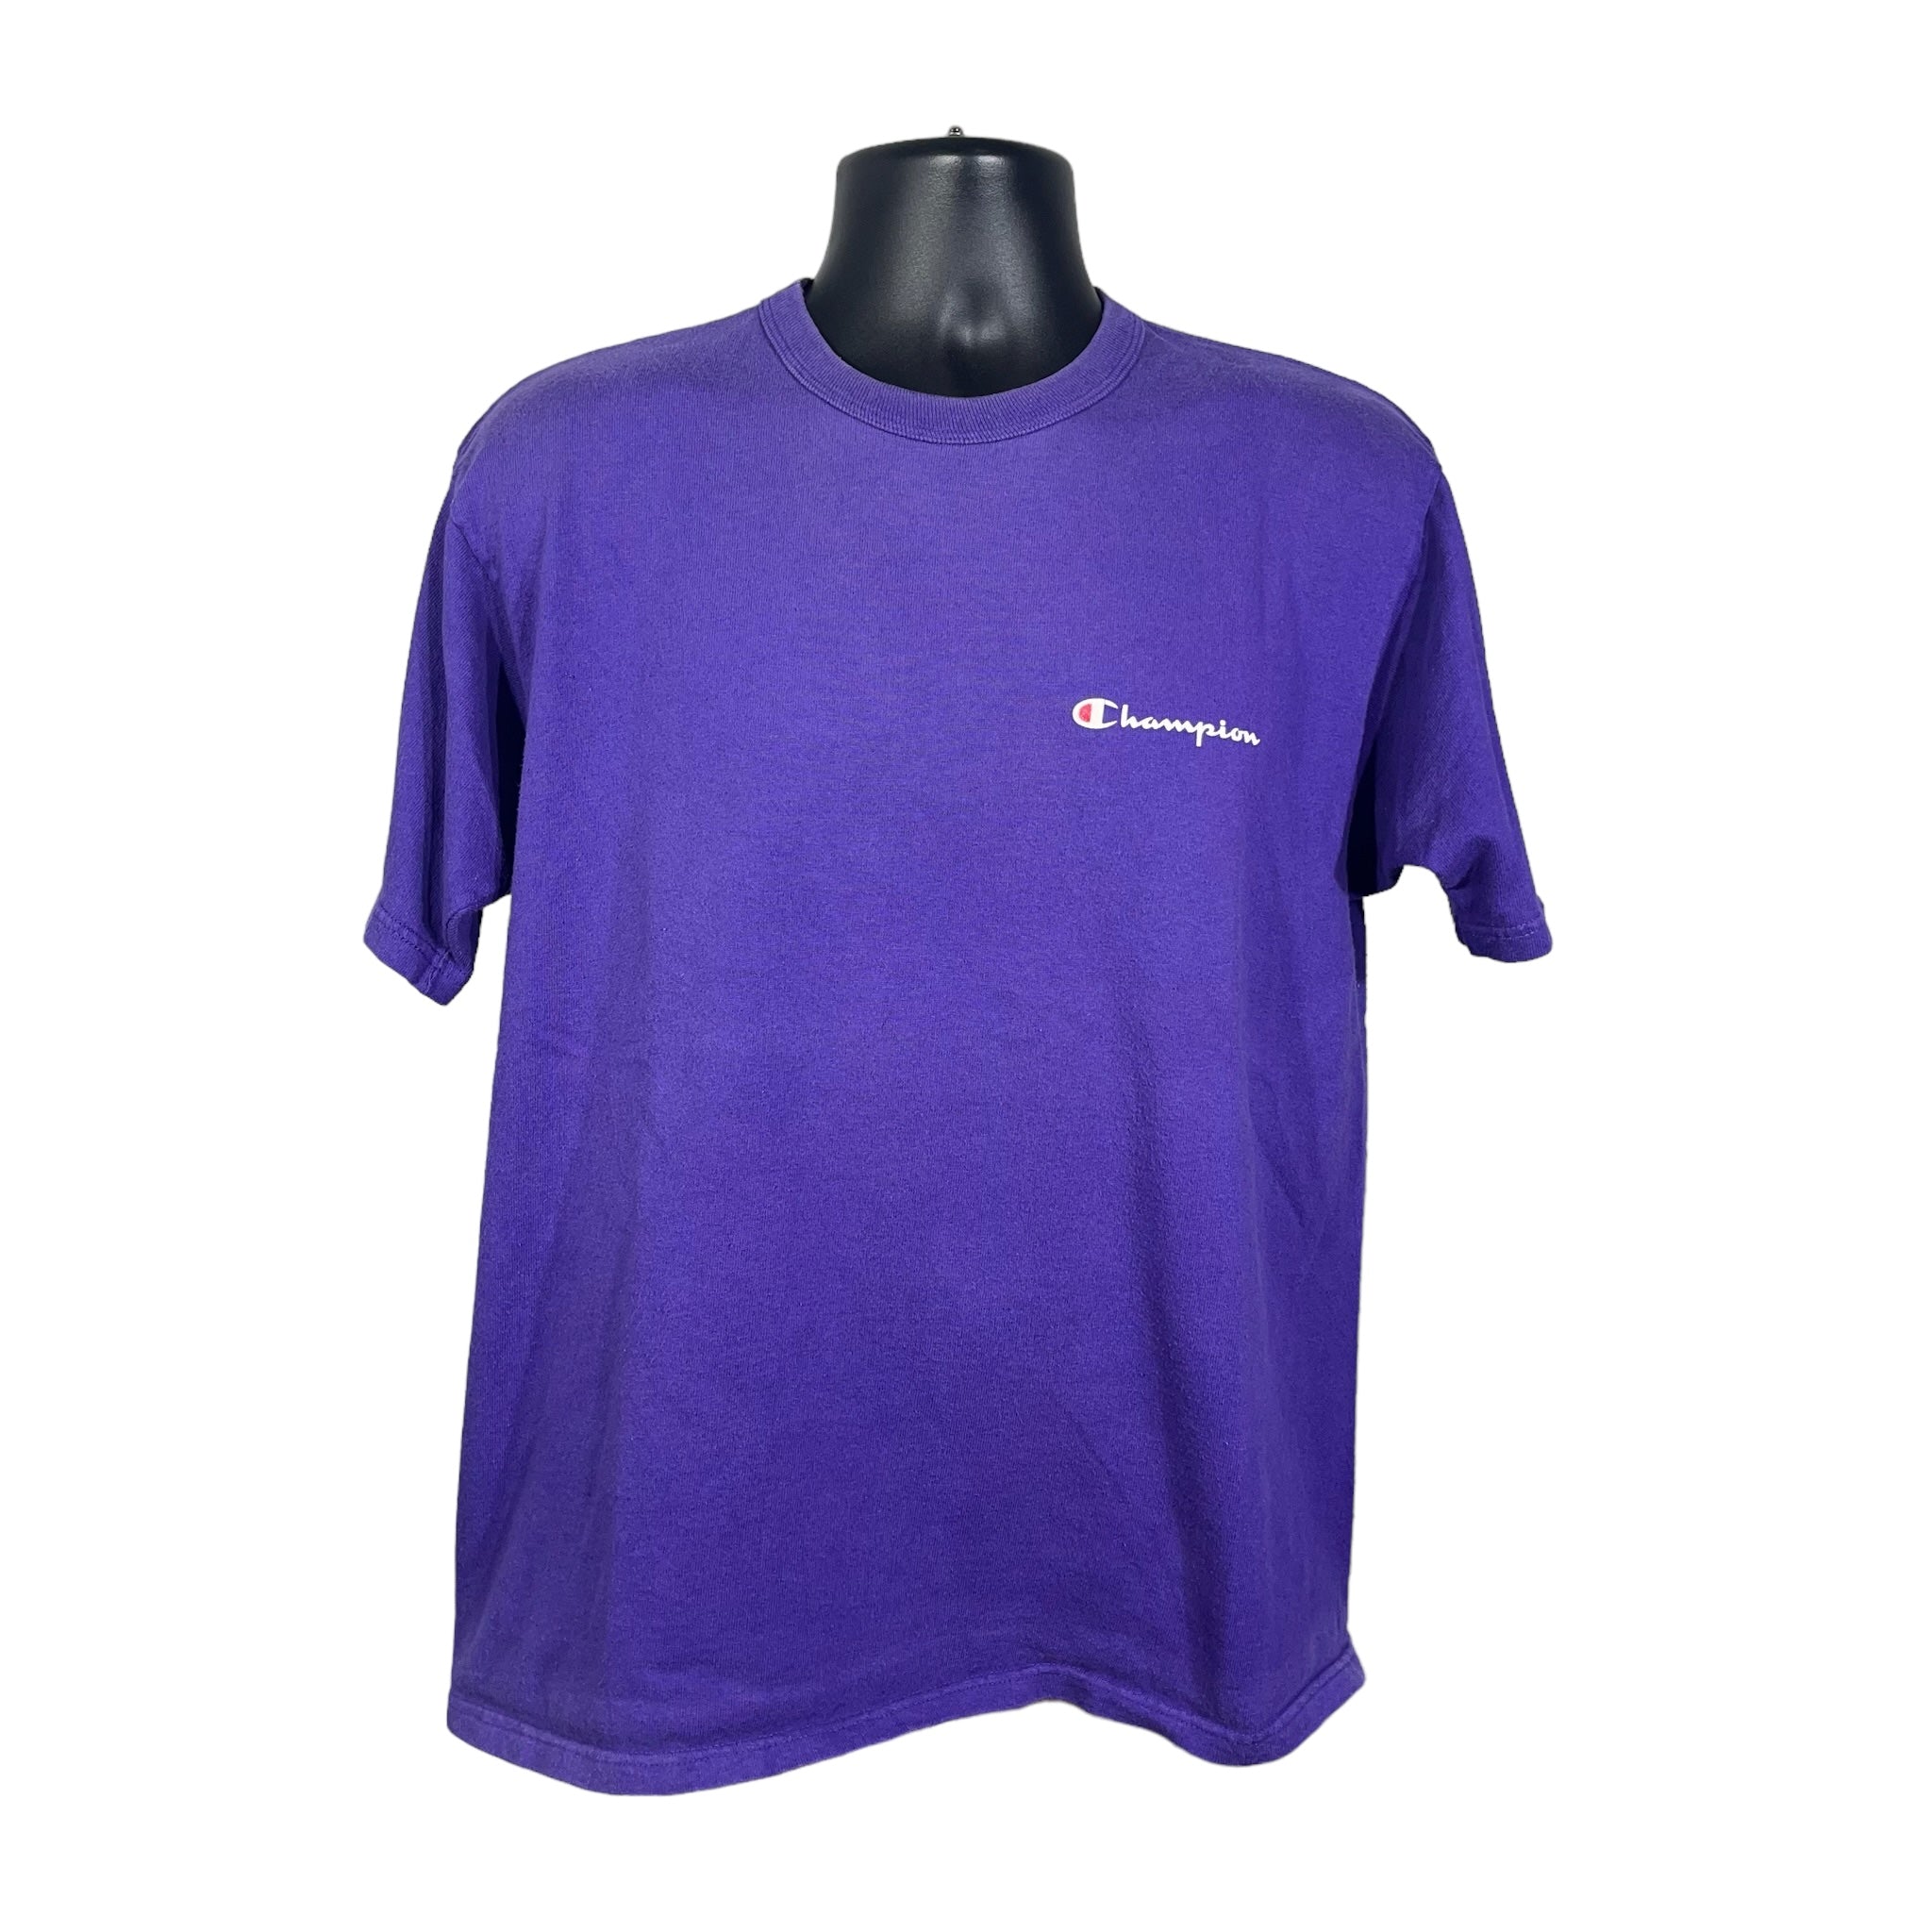 Vintage Champion Pocket Spellout Tee 90s